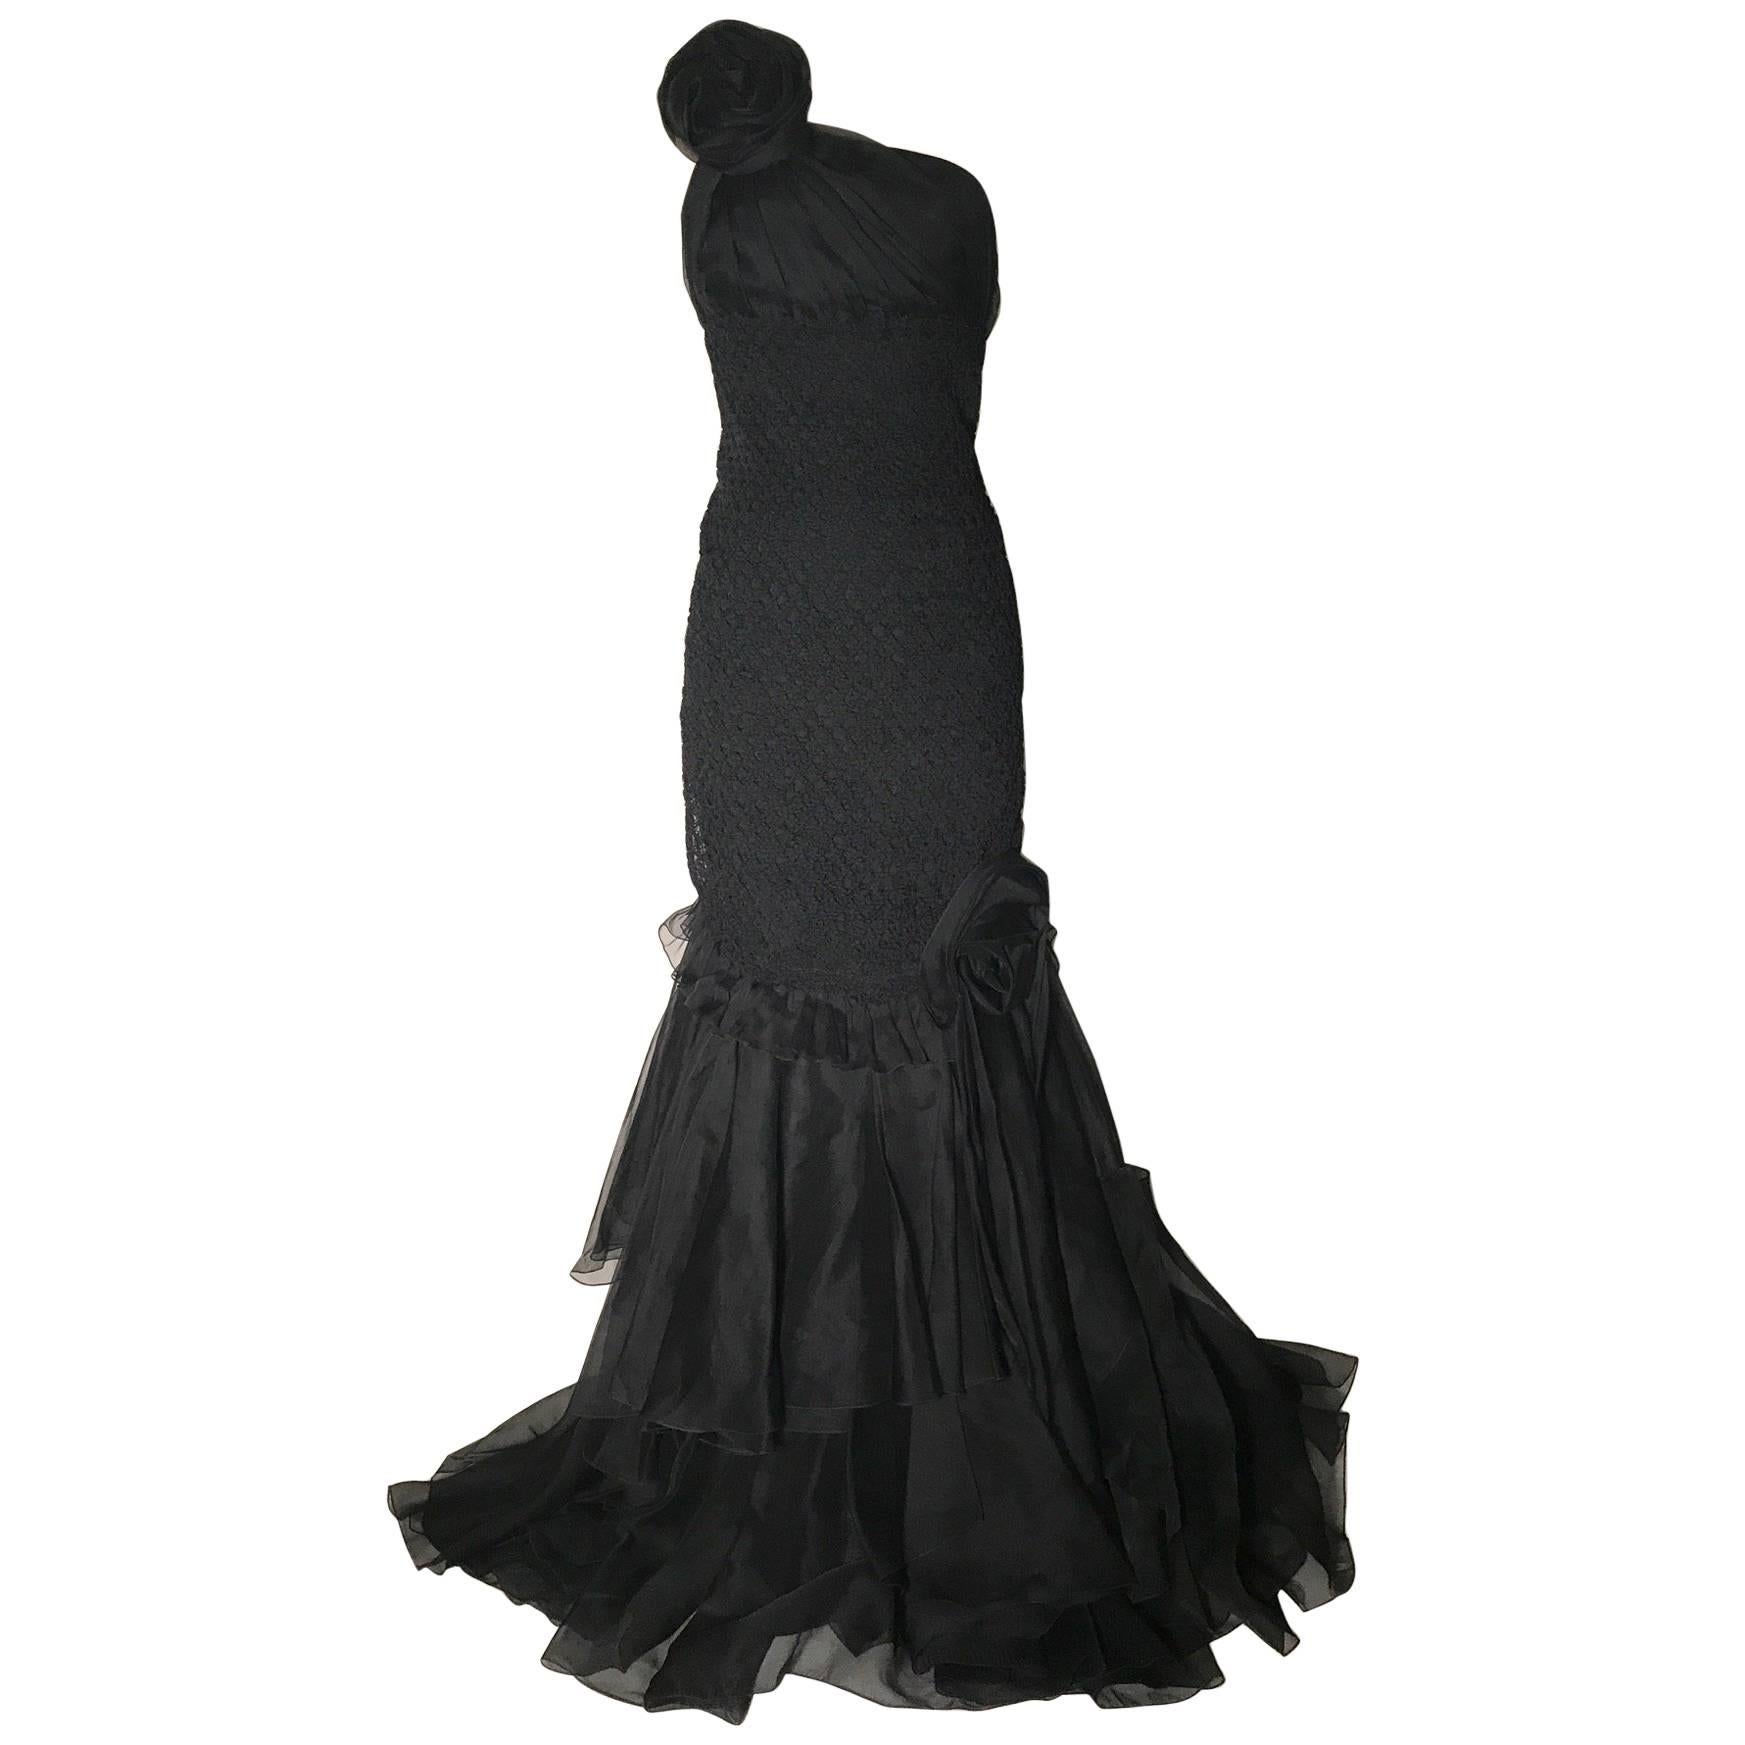 Prada Black Textured One Shoulder Gown with Rosette Detail and Ruffle Hem, 2008 